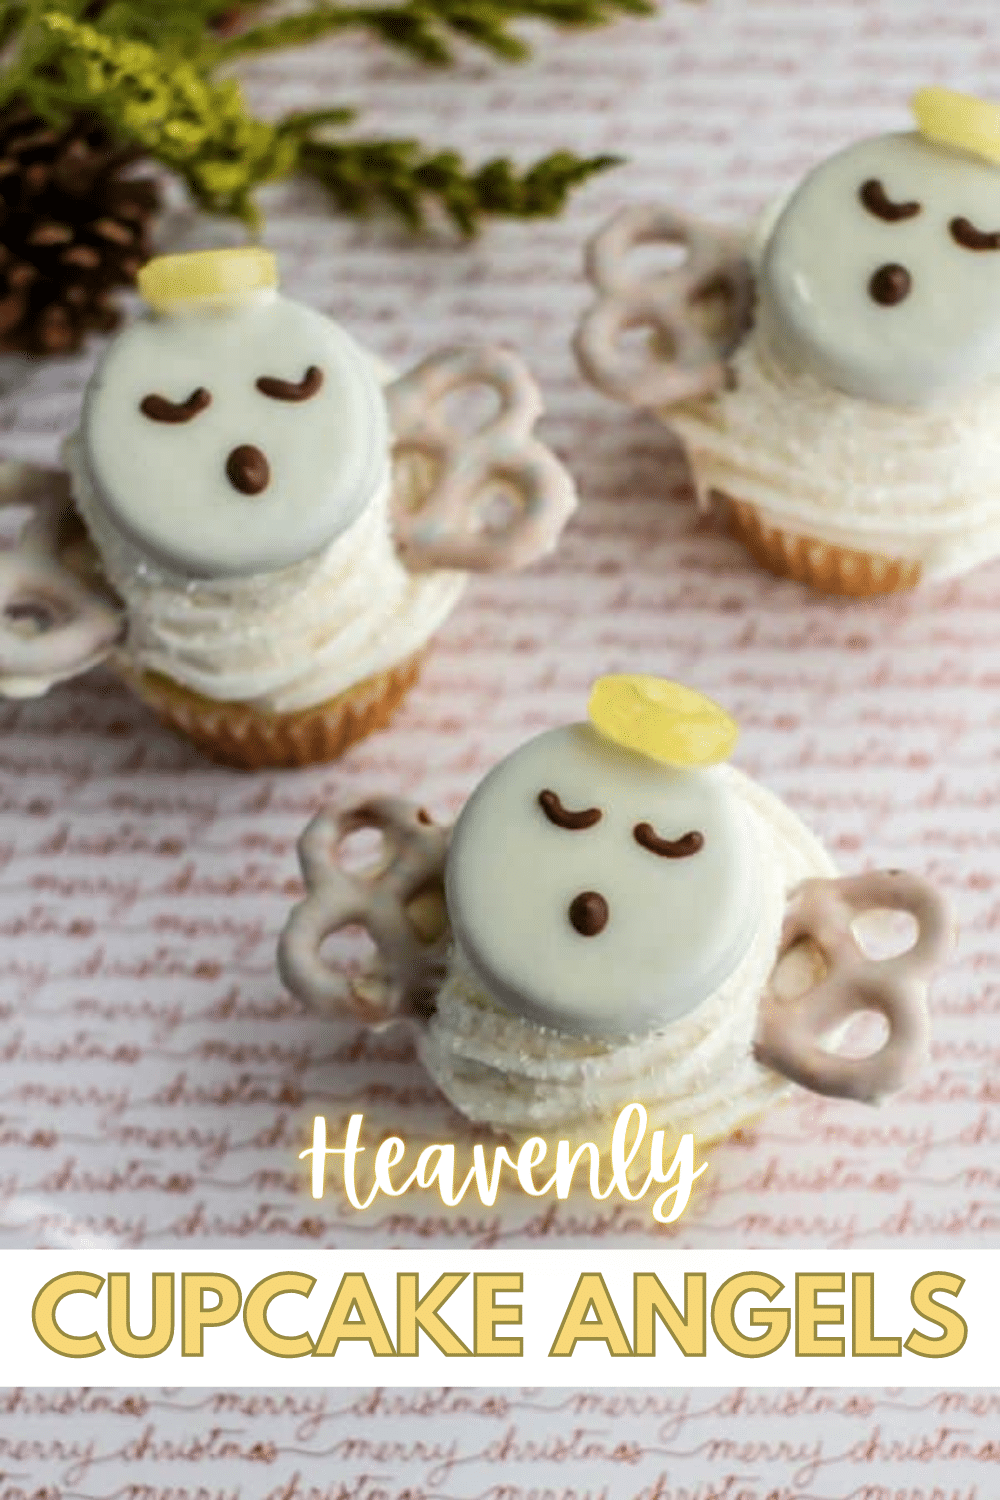 These heavenly cupcake angels only take a few simple ingredients to create and make a fun, but subtle addition to your dessert table. Ideal for any religious-based holiday or party. #clevercupcakes #funfood #angels #cupcakes via @wondermomwannab